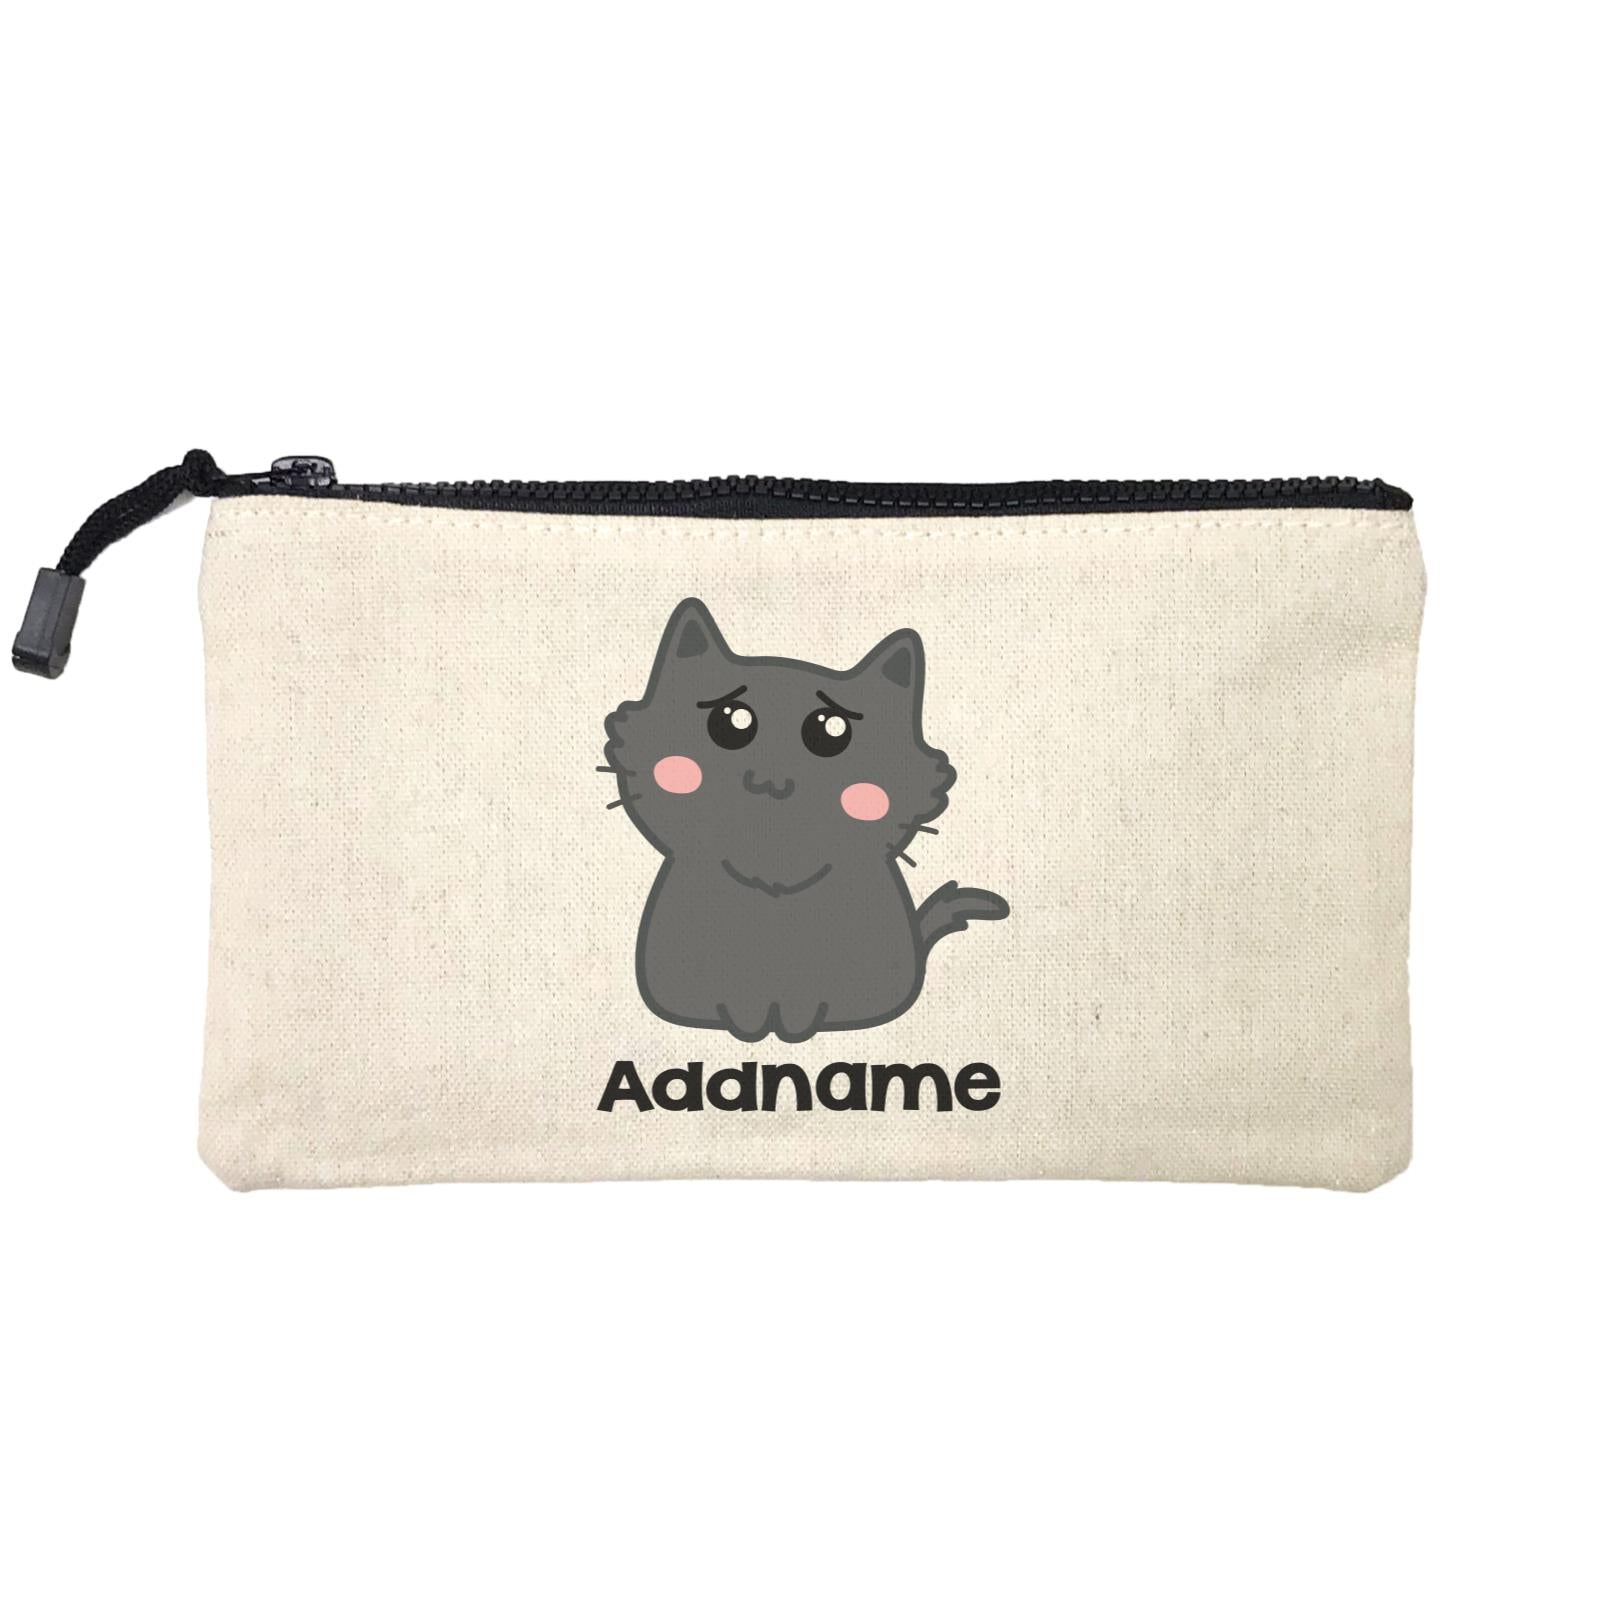 Drawn Adorable Cats Dark Grey Addname Mini Accessories Stationery Pouch